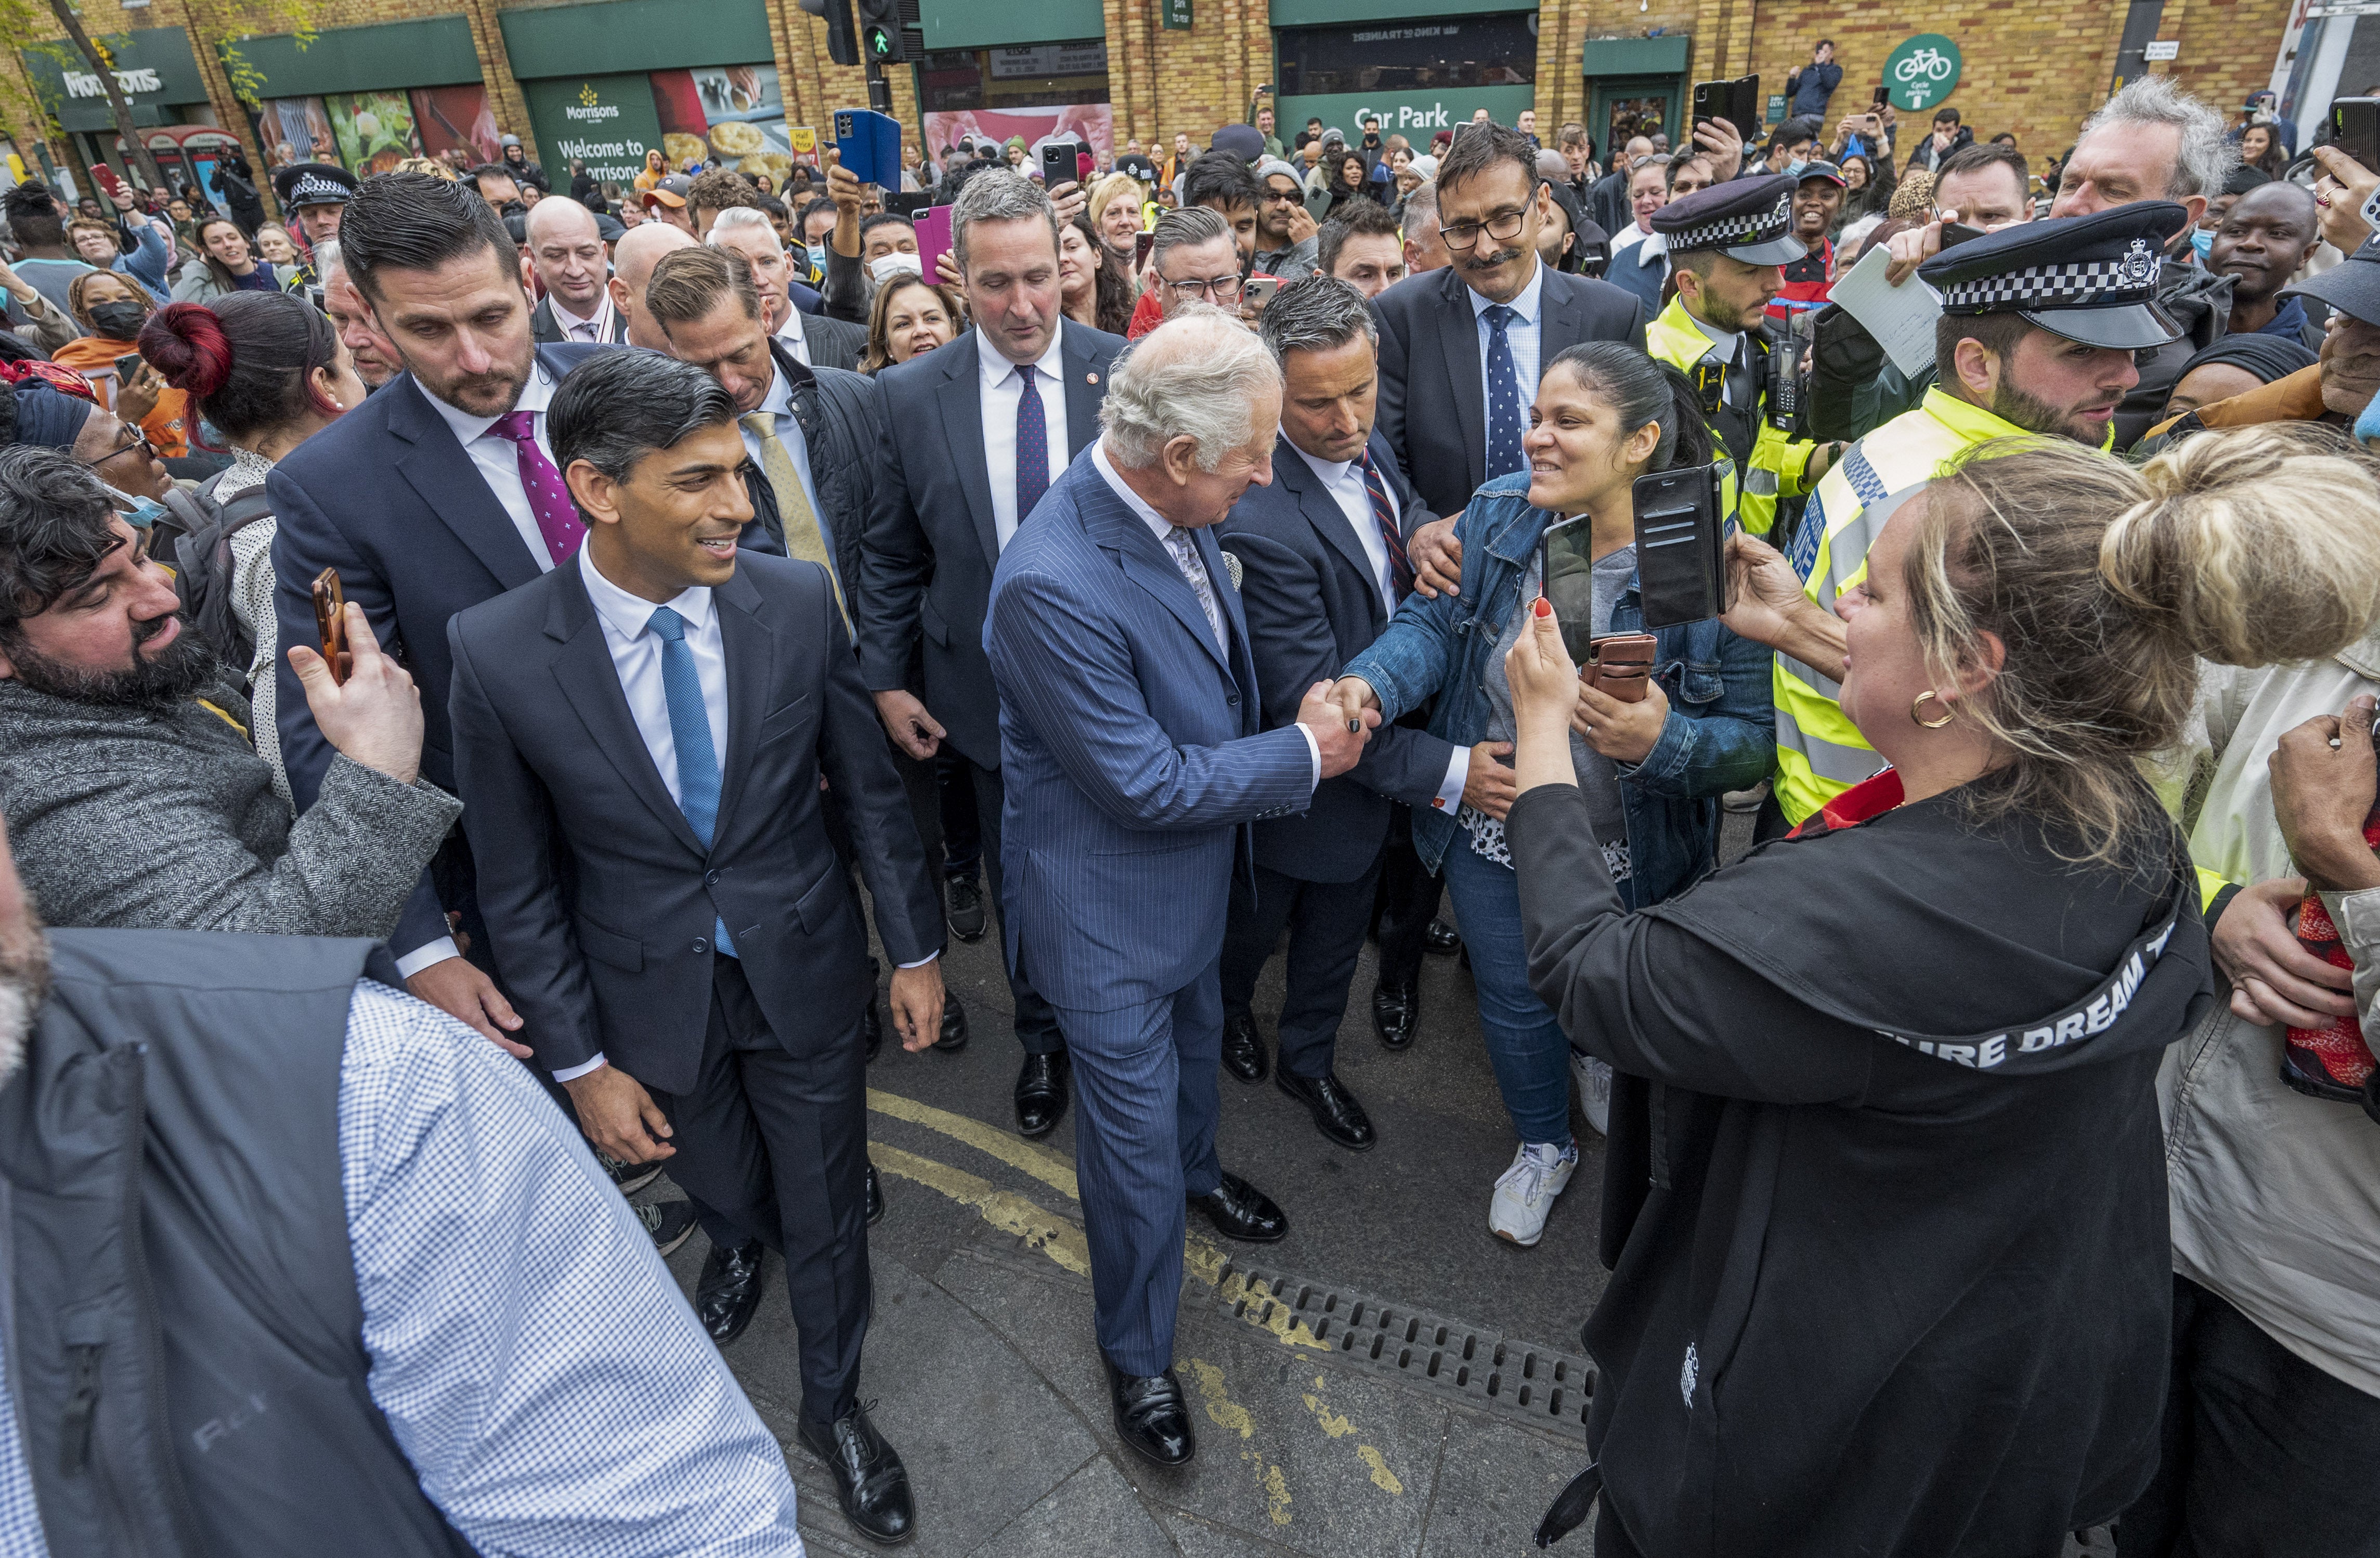 The Prince of Wales, accompanied by Chancellor Rishi Sunak meeting the public in Walworth, London (Paul Grover/Daily Telegraph/PA)